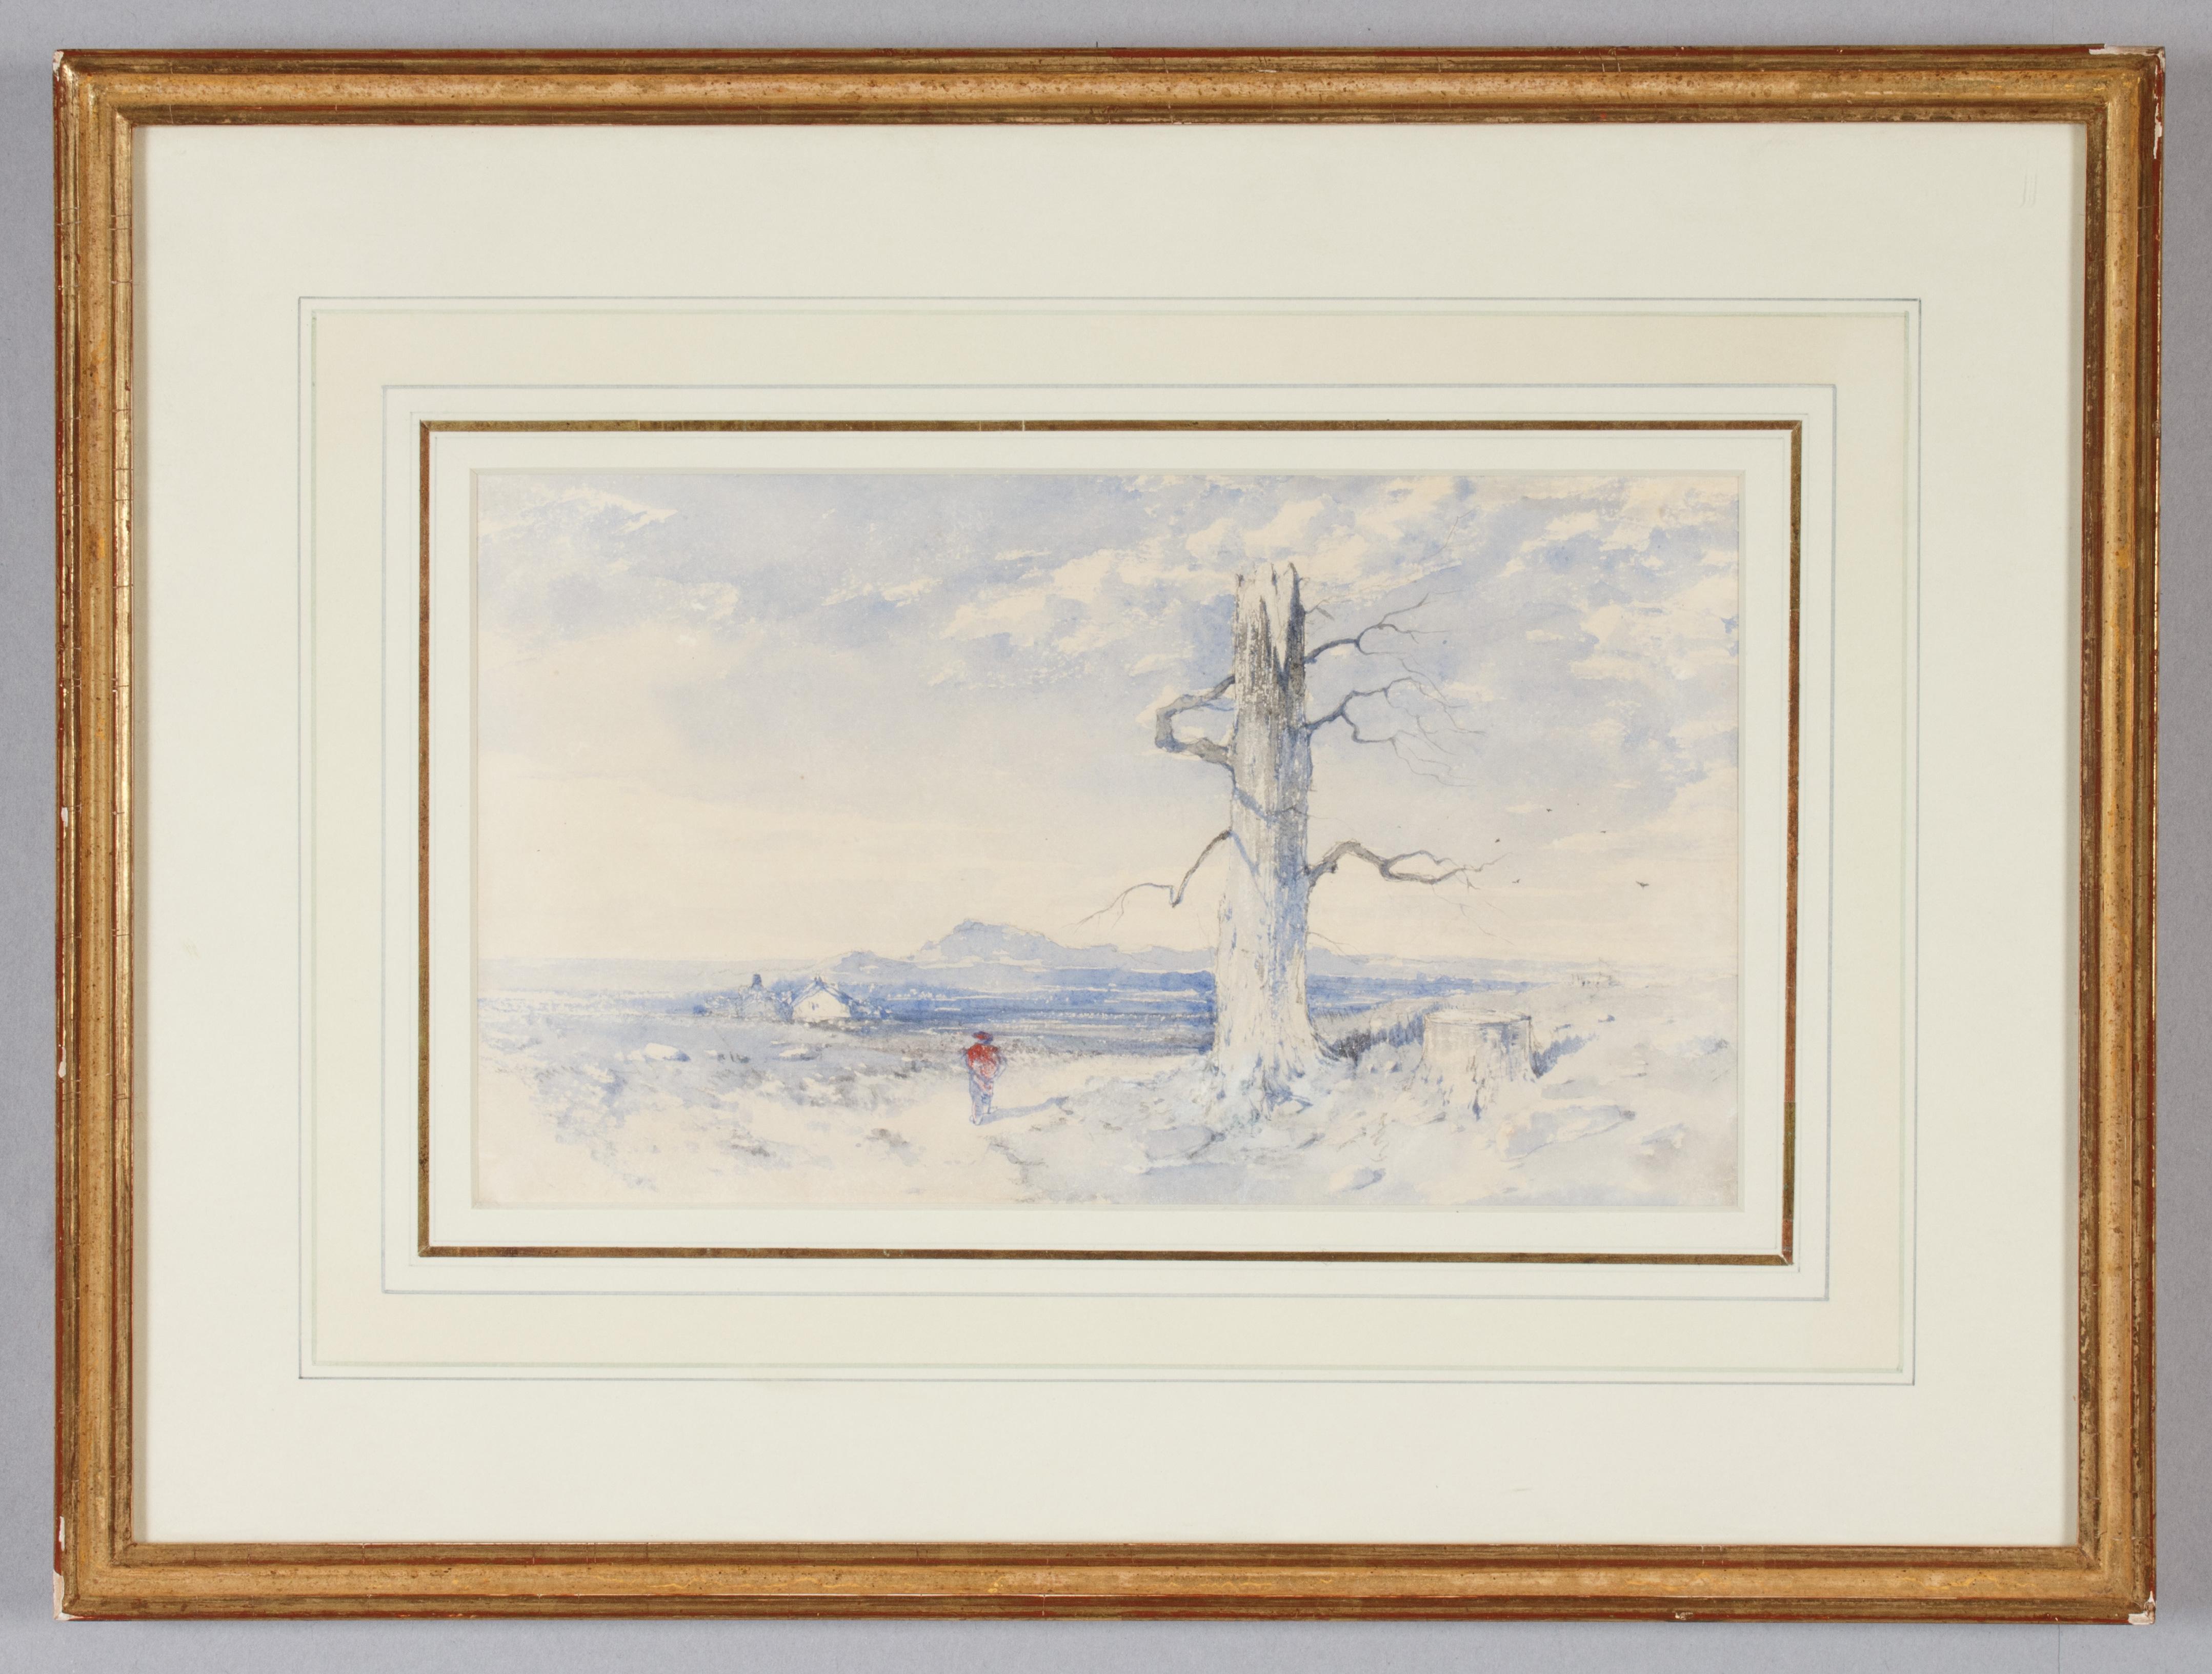 William James Blacklock
(English, 1816-1858)
Rural Landscape,  
Watercolor on paper, 5 7/8 x 7 7/8 inches
Framed: 15 x 18 inches (approx.)

Inscribed on verso: (in pencil) "Heath scene in Cumberland/by W.J. Blacklock"; (pencil, different hand)